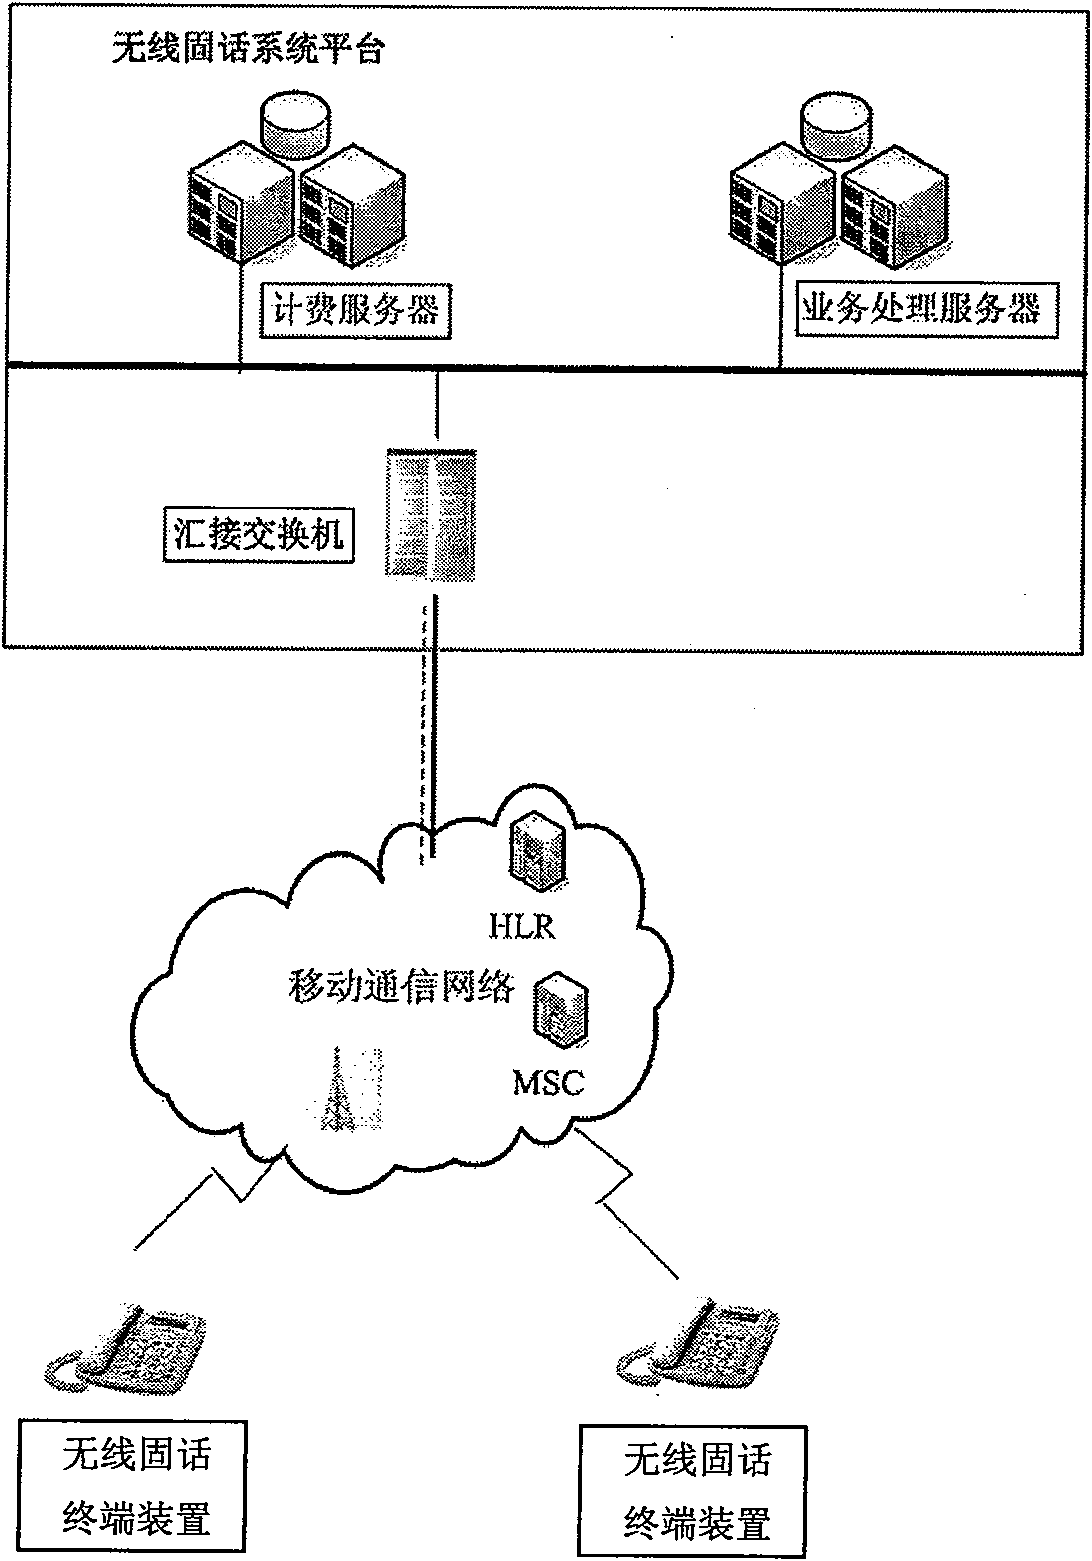 Implementation method of fixed wireless phone system platform based on improved fixed wireless phone terminal